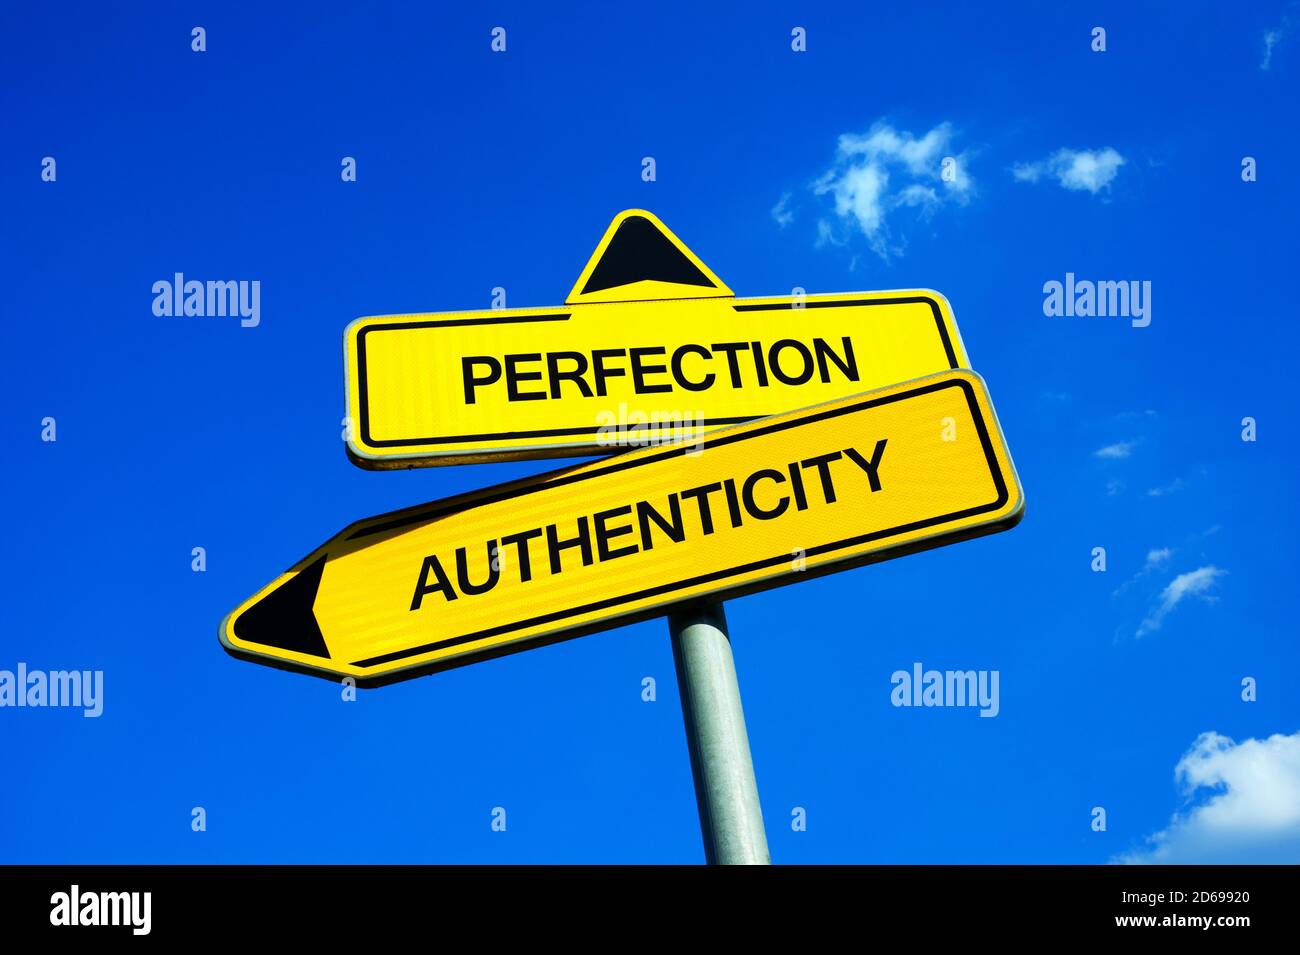 Perfection vs Authenticity - Traffic sign with two options - being pefect and flawless or authentic and authentic and imperfect Stock Photo